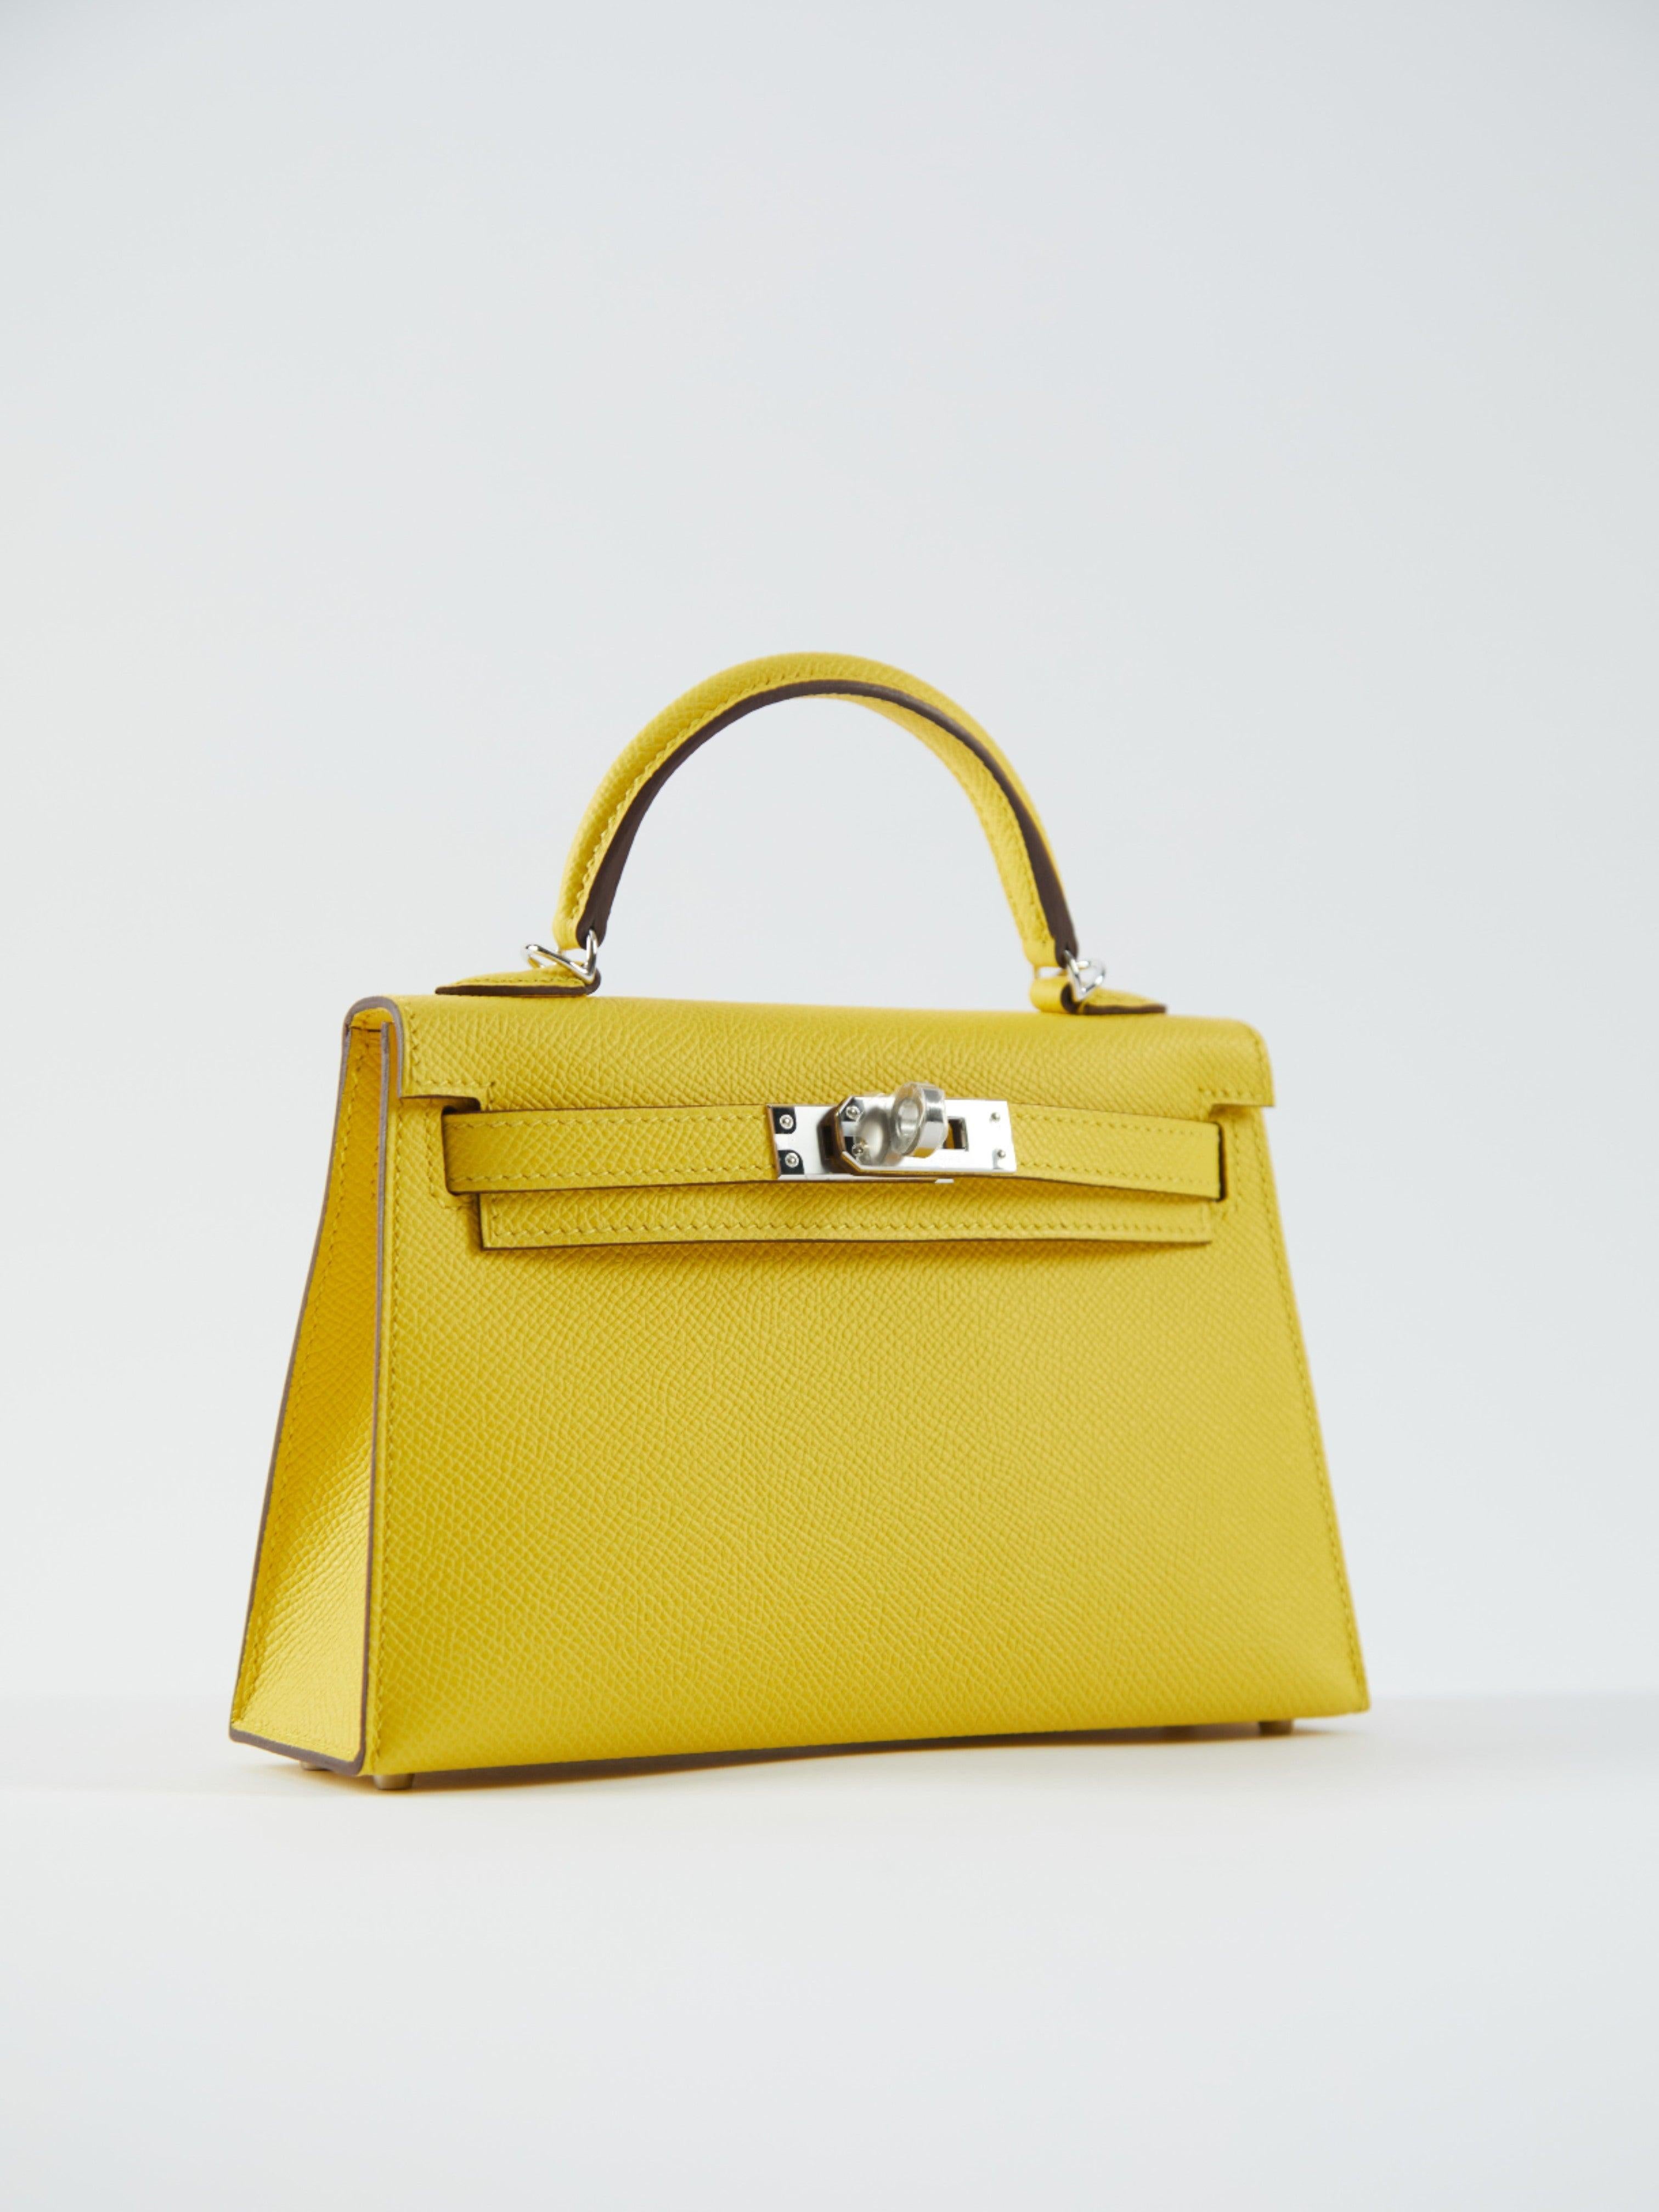 HERMÈS MINI KELLY II 20CM JAUNE DE NAPLES Epsom Leather with Palladium Hardware In Excellent Condition For Sale In London, GB